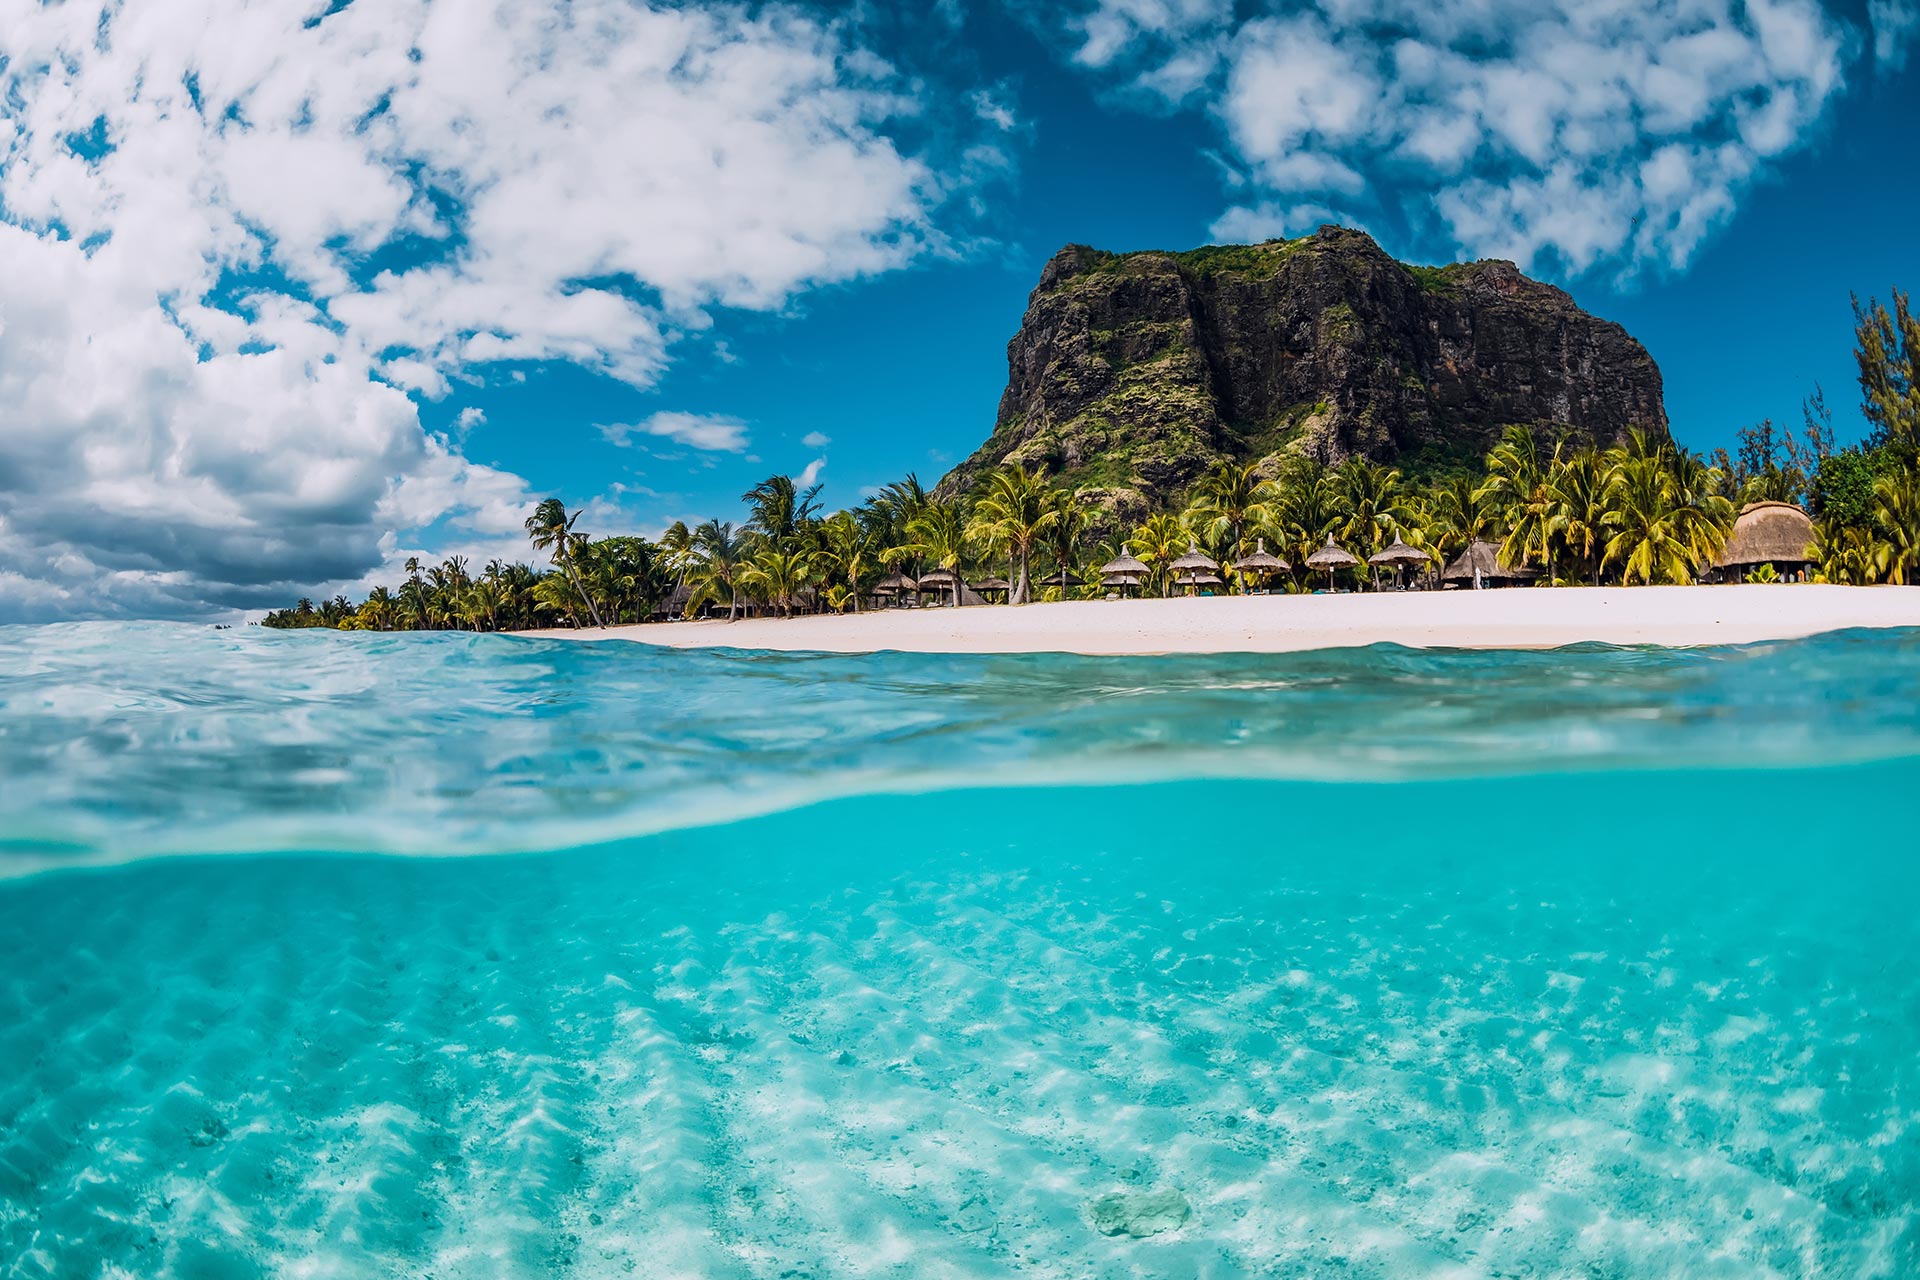 tropical-crystal-ocean-with-le-morne-mountain-and-luxury-beach-in-mauritius-split-view-adobestock290542623-1.jpg